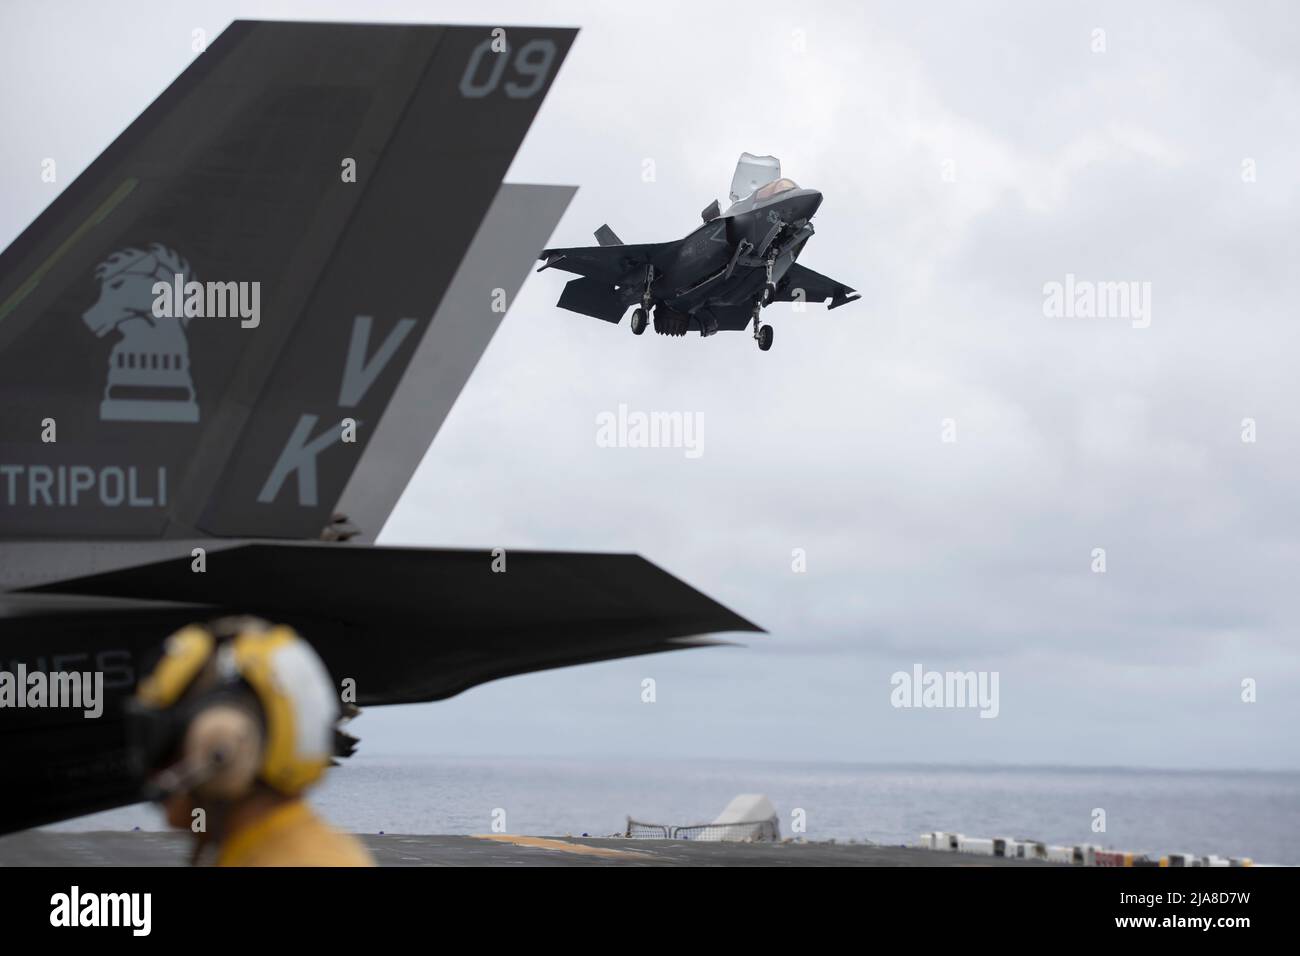 220526-XN177-1181 PACIFIC OCEAN (May 26, 2022) – An F-35B Lightning II aircraft assigned to Marine Fighter Attack Squadron (VMFA) 121 lands aboard amphibious assault carrier USS Tripoli (LHA 7), May 26, 2022. Tripoli is conducting routine operations in U.S. 7th Fleet. (U.S. Navy photo by Mass Communication Specialist 1st Class Peter Burghart) Stock Photo